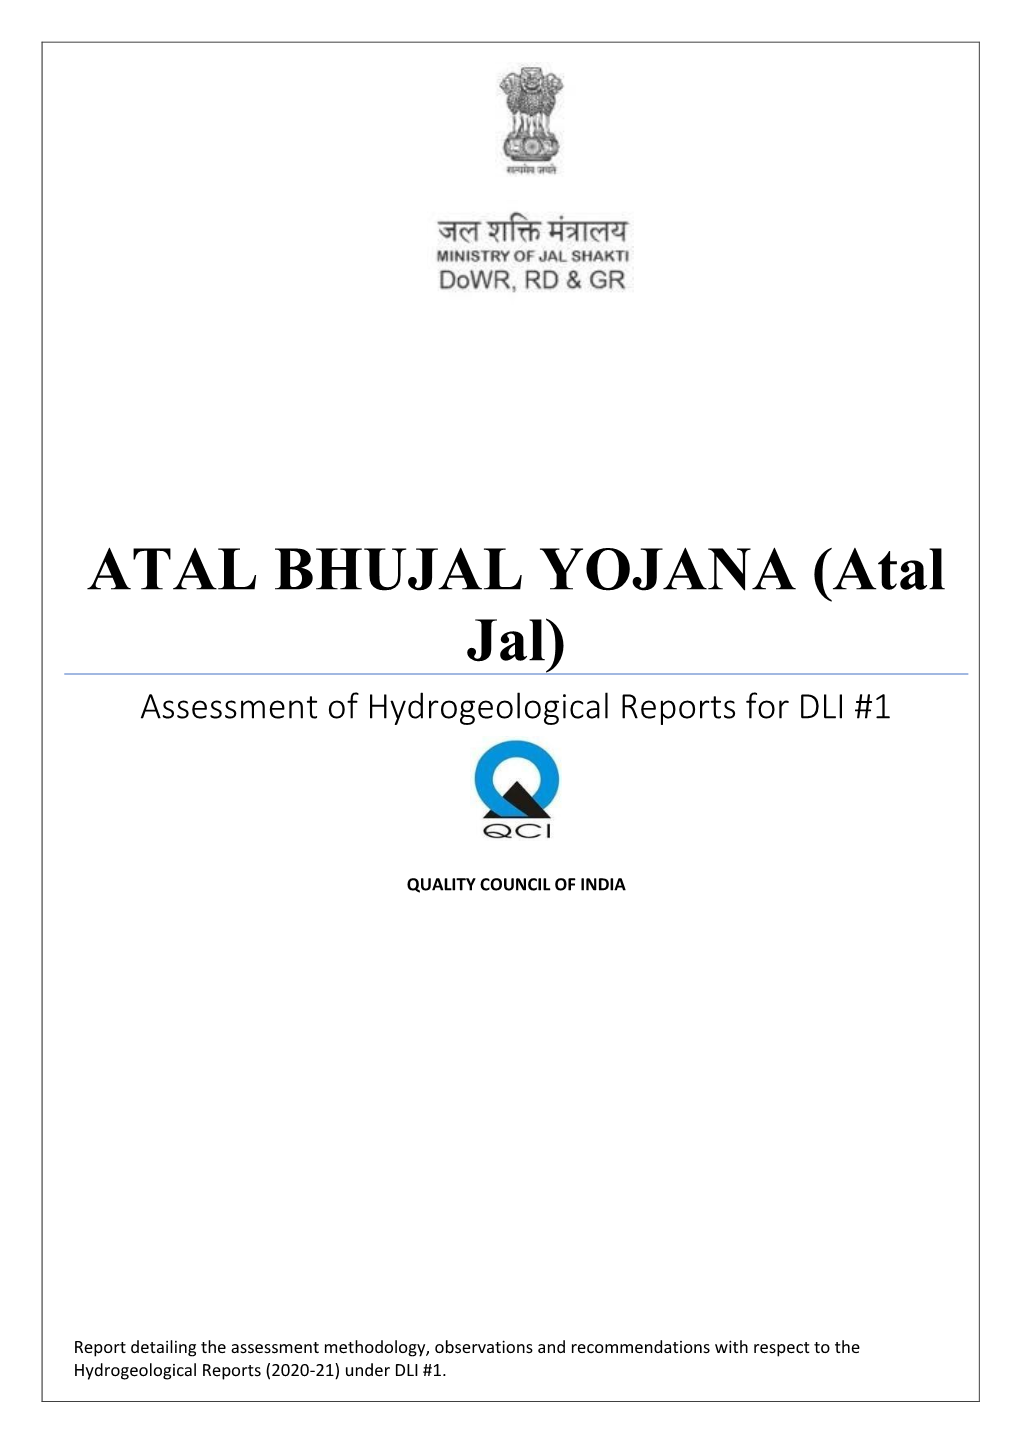 Assessment of Hydrogeological Reports for DLI #1